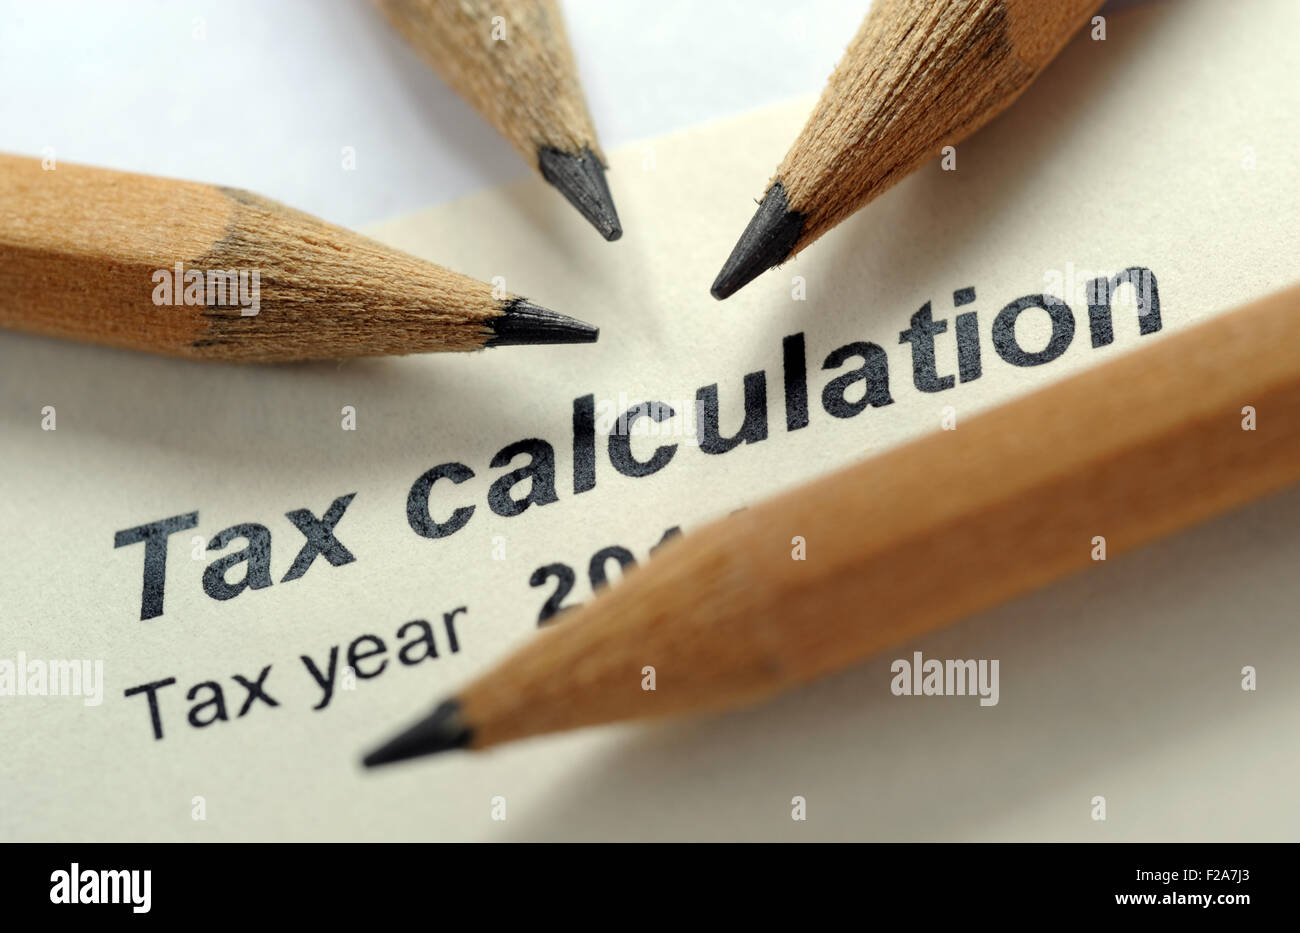 HMRC TAX CALCULATION LETTER WITH PENCILS RE INCOME SELF ASSESSMENT EMPLOYMENT AVOIDANCE HM REVENUE CUSTOMS TAXES FORM OWED UK Stock Photo